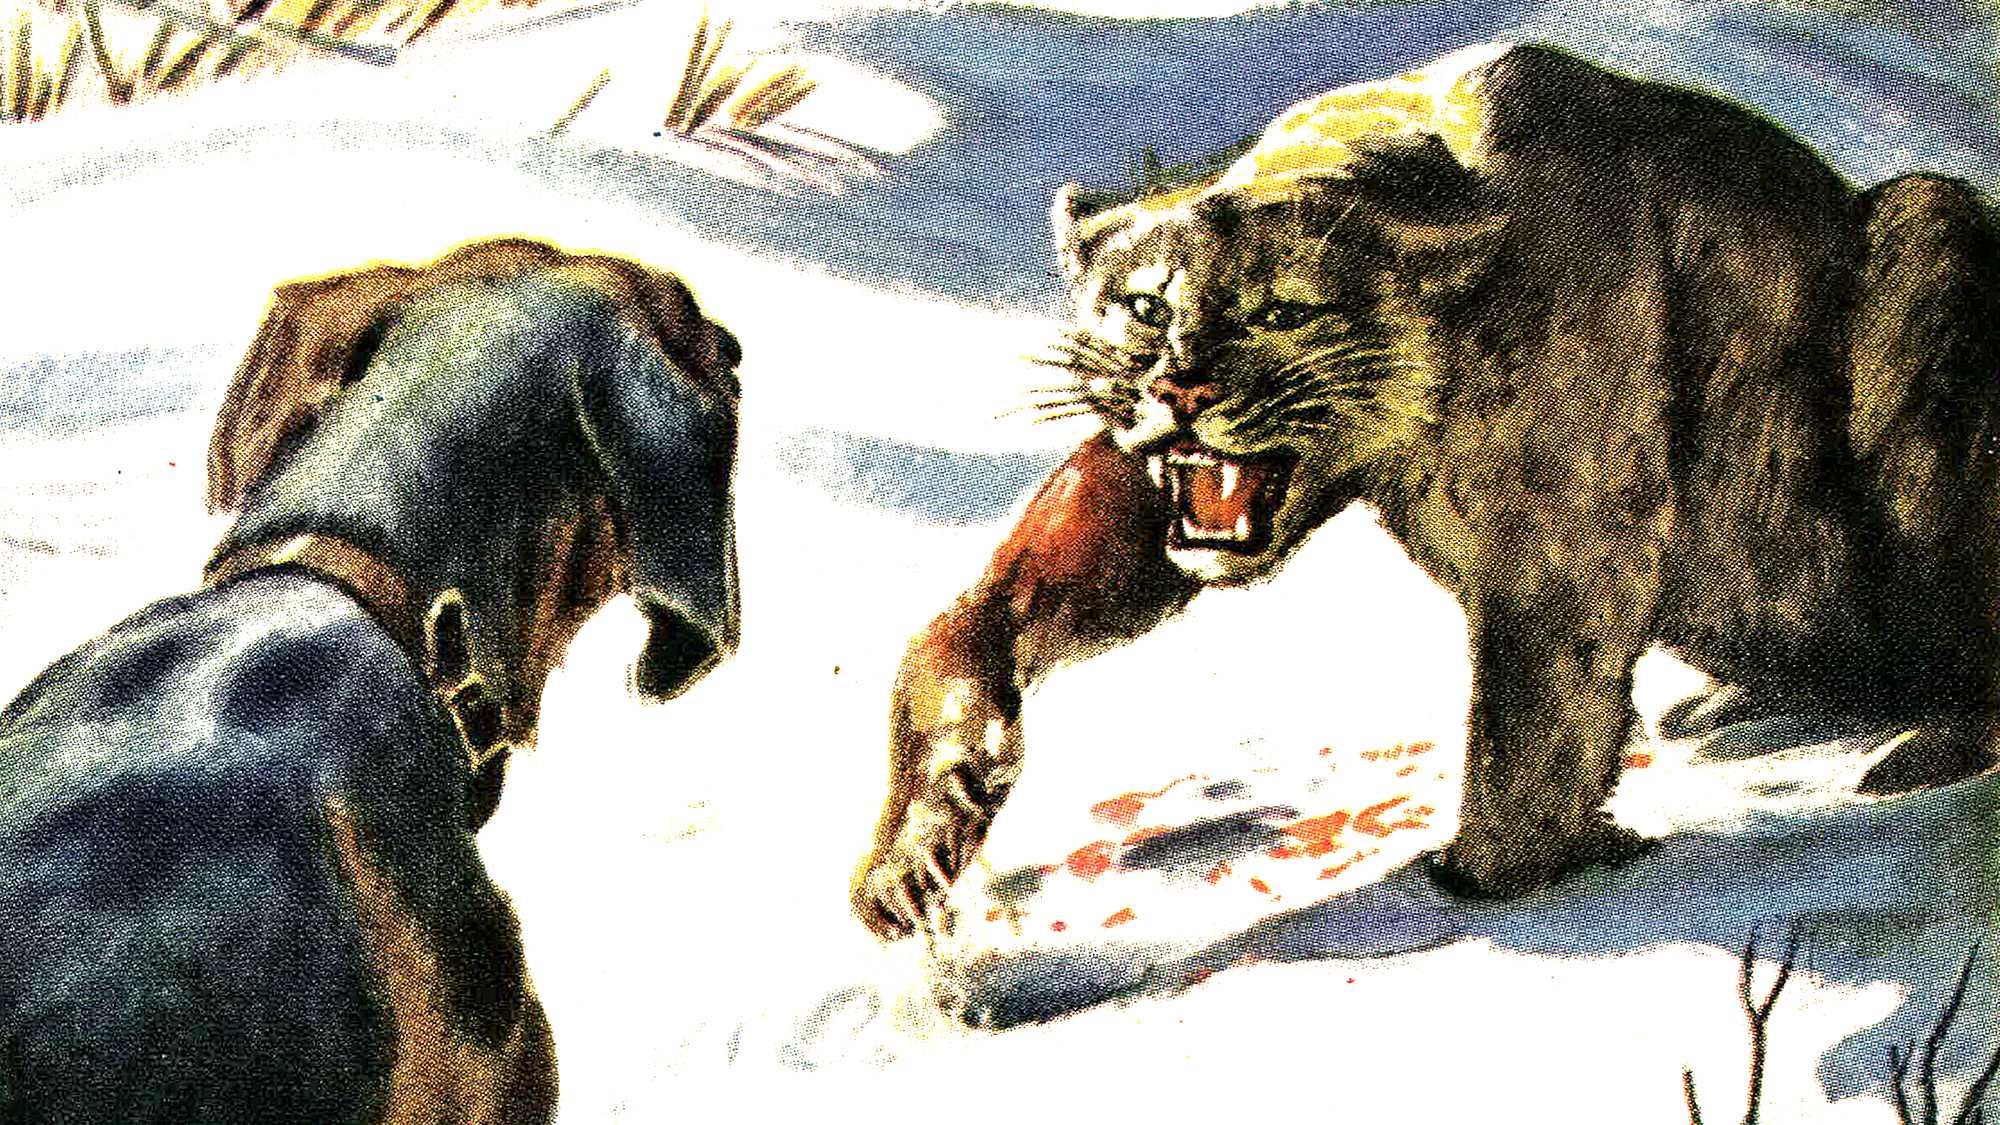 My Third and Final Showdown with the Cougar Called Bloody-Foot, From the Archives